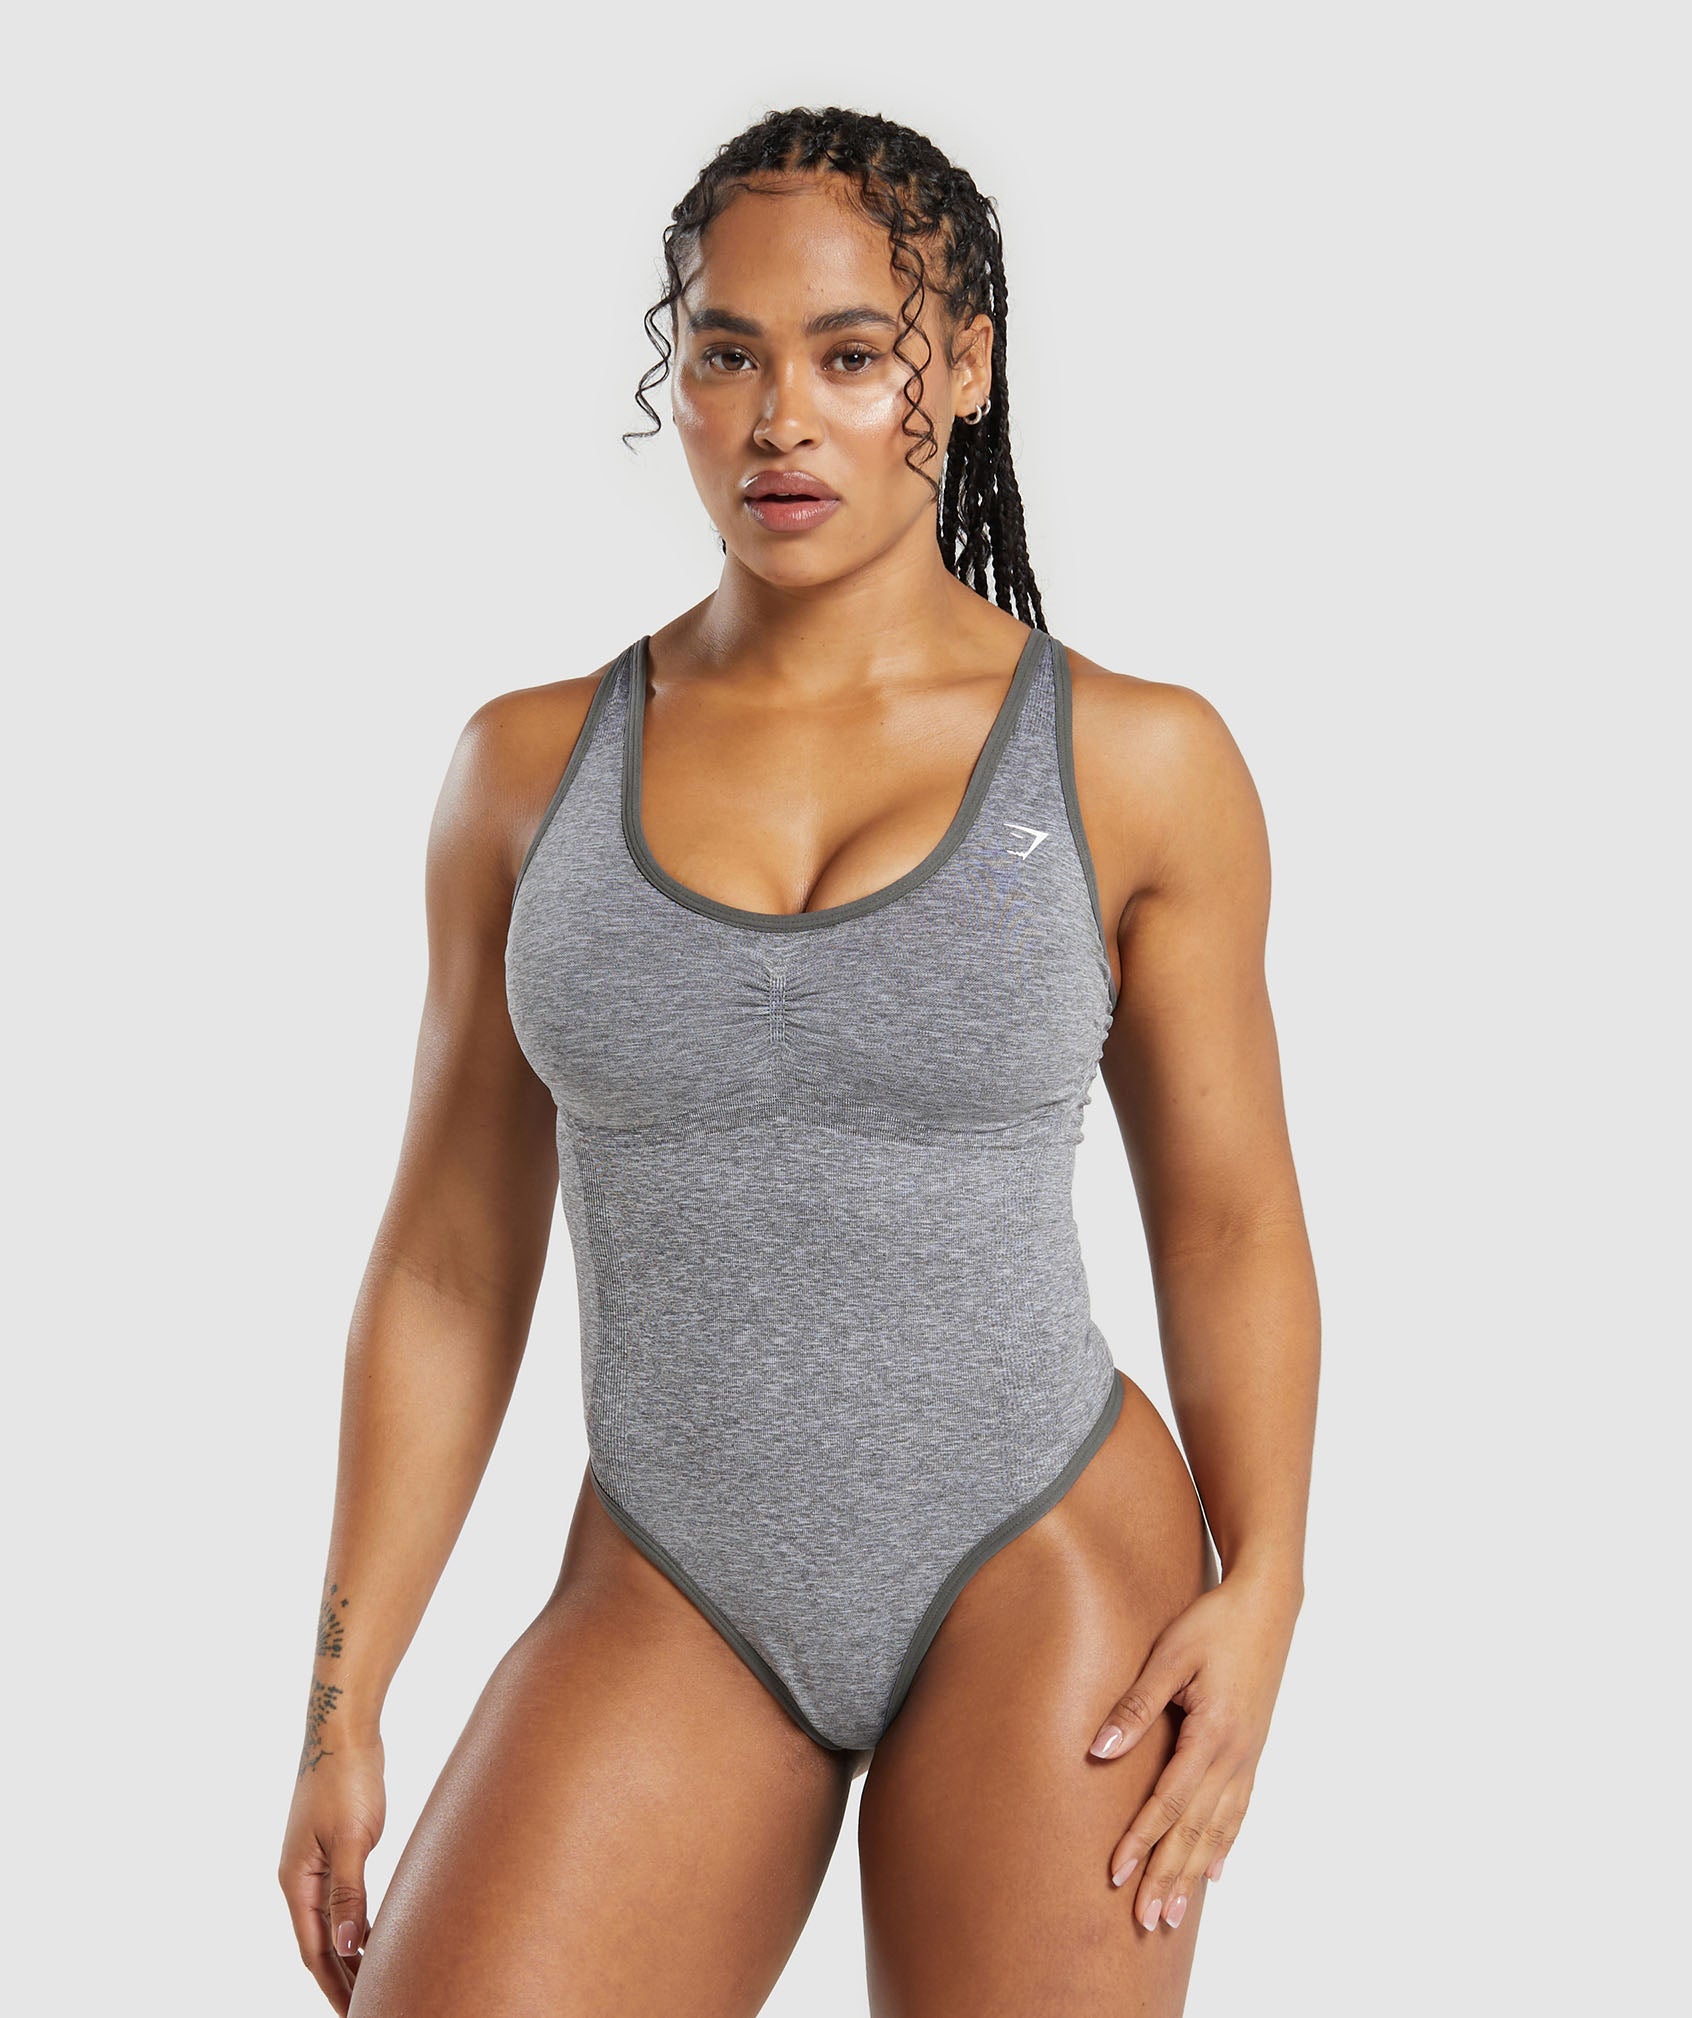 Cocosmart bodysuit for women plus size Bodysuit Women's Athletic Running  Sports Bra Fitness Seamless Padded Vest Wrapped Chest Daily Tank Top Blouse  Grey XX-Large price in UAE,  UAE